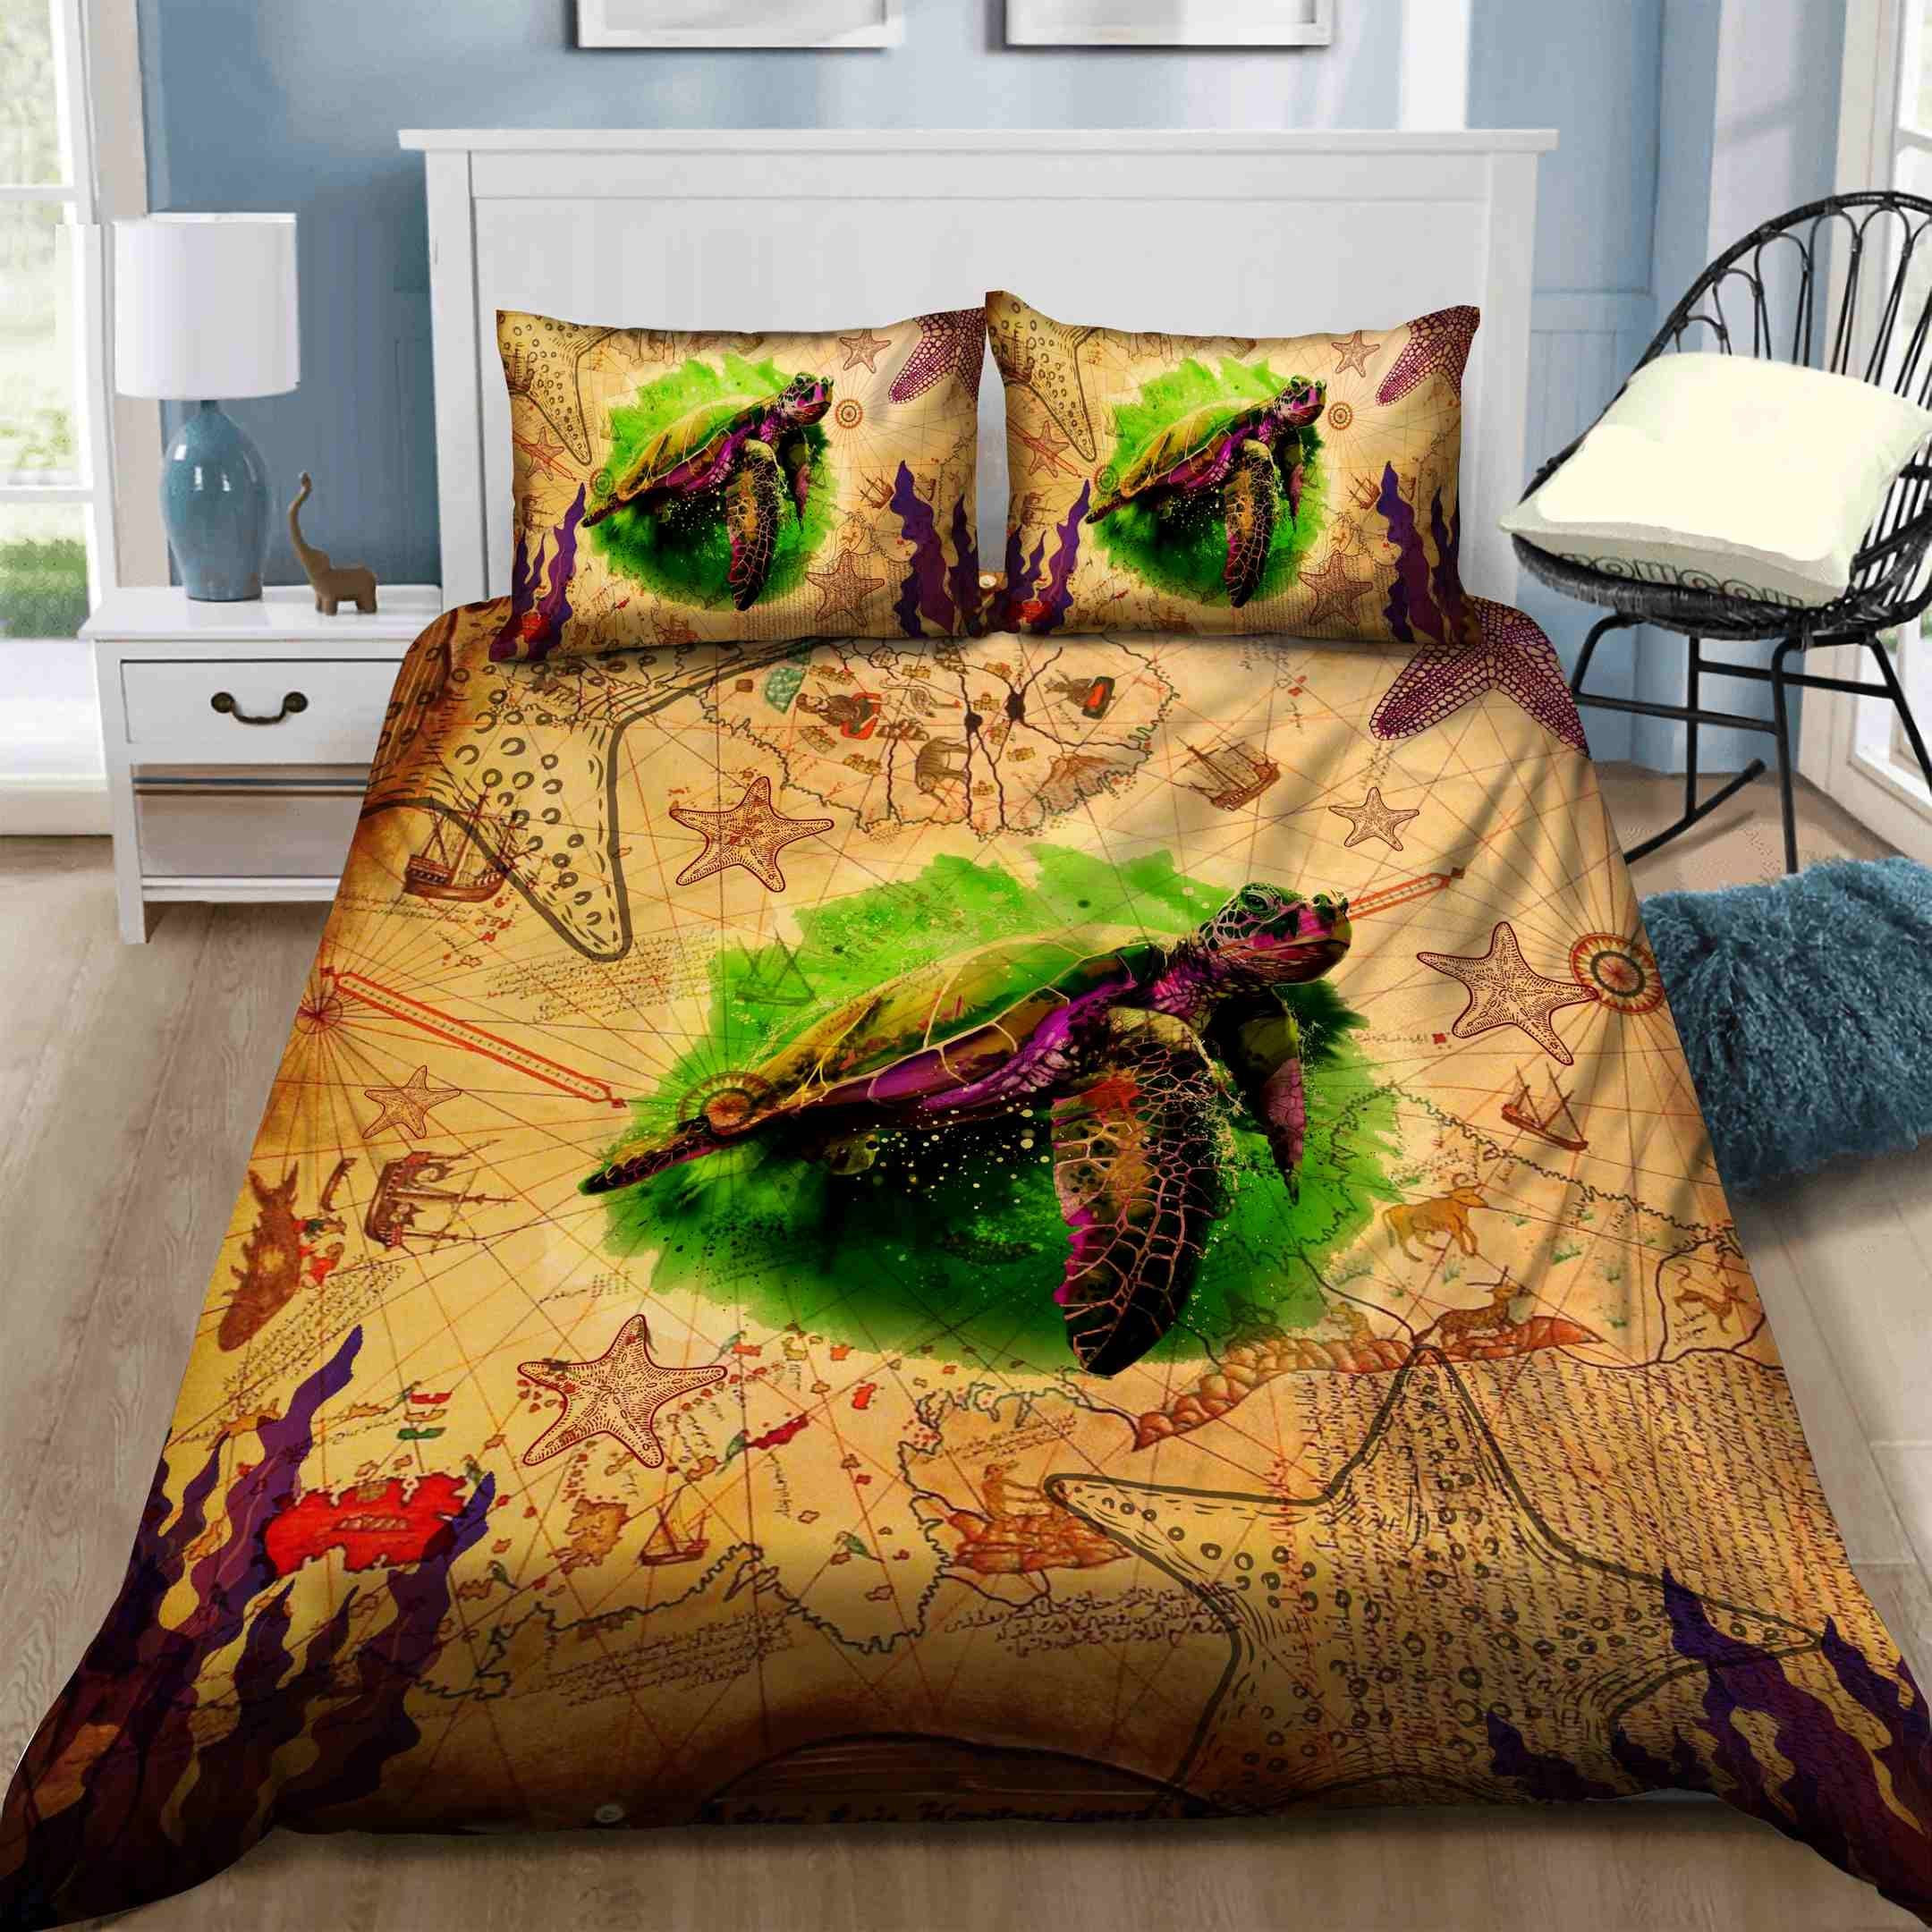 retro tortoise bed linens quilt cover bedding collection ideal presents for birthdays holidays and special occasions rcigv